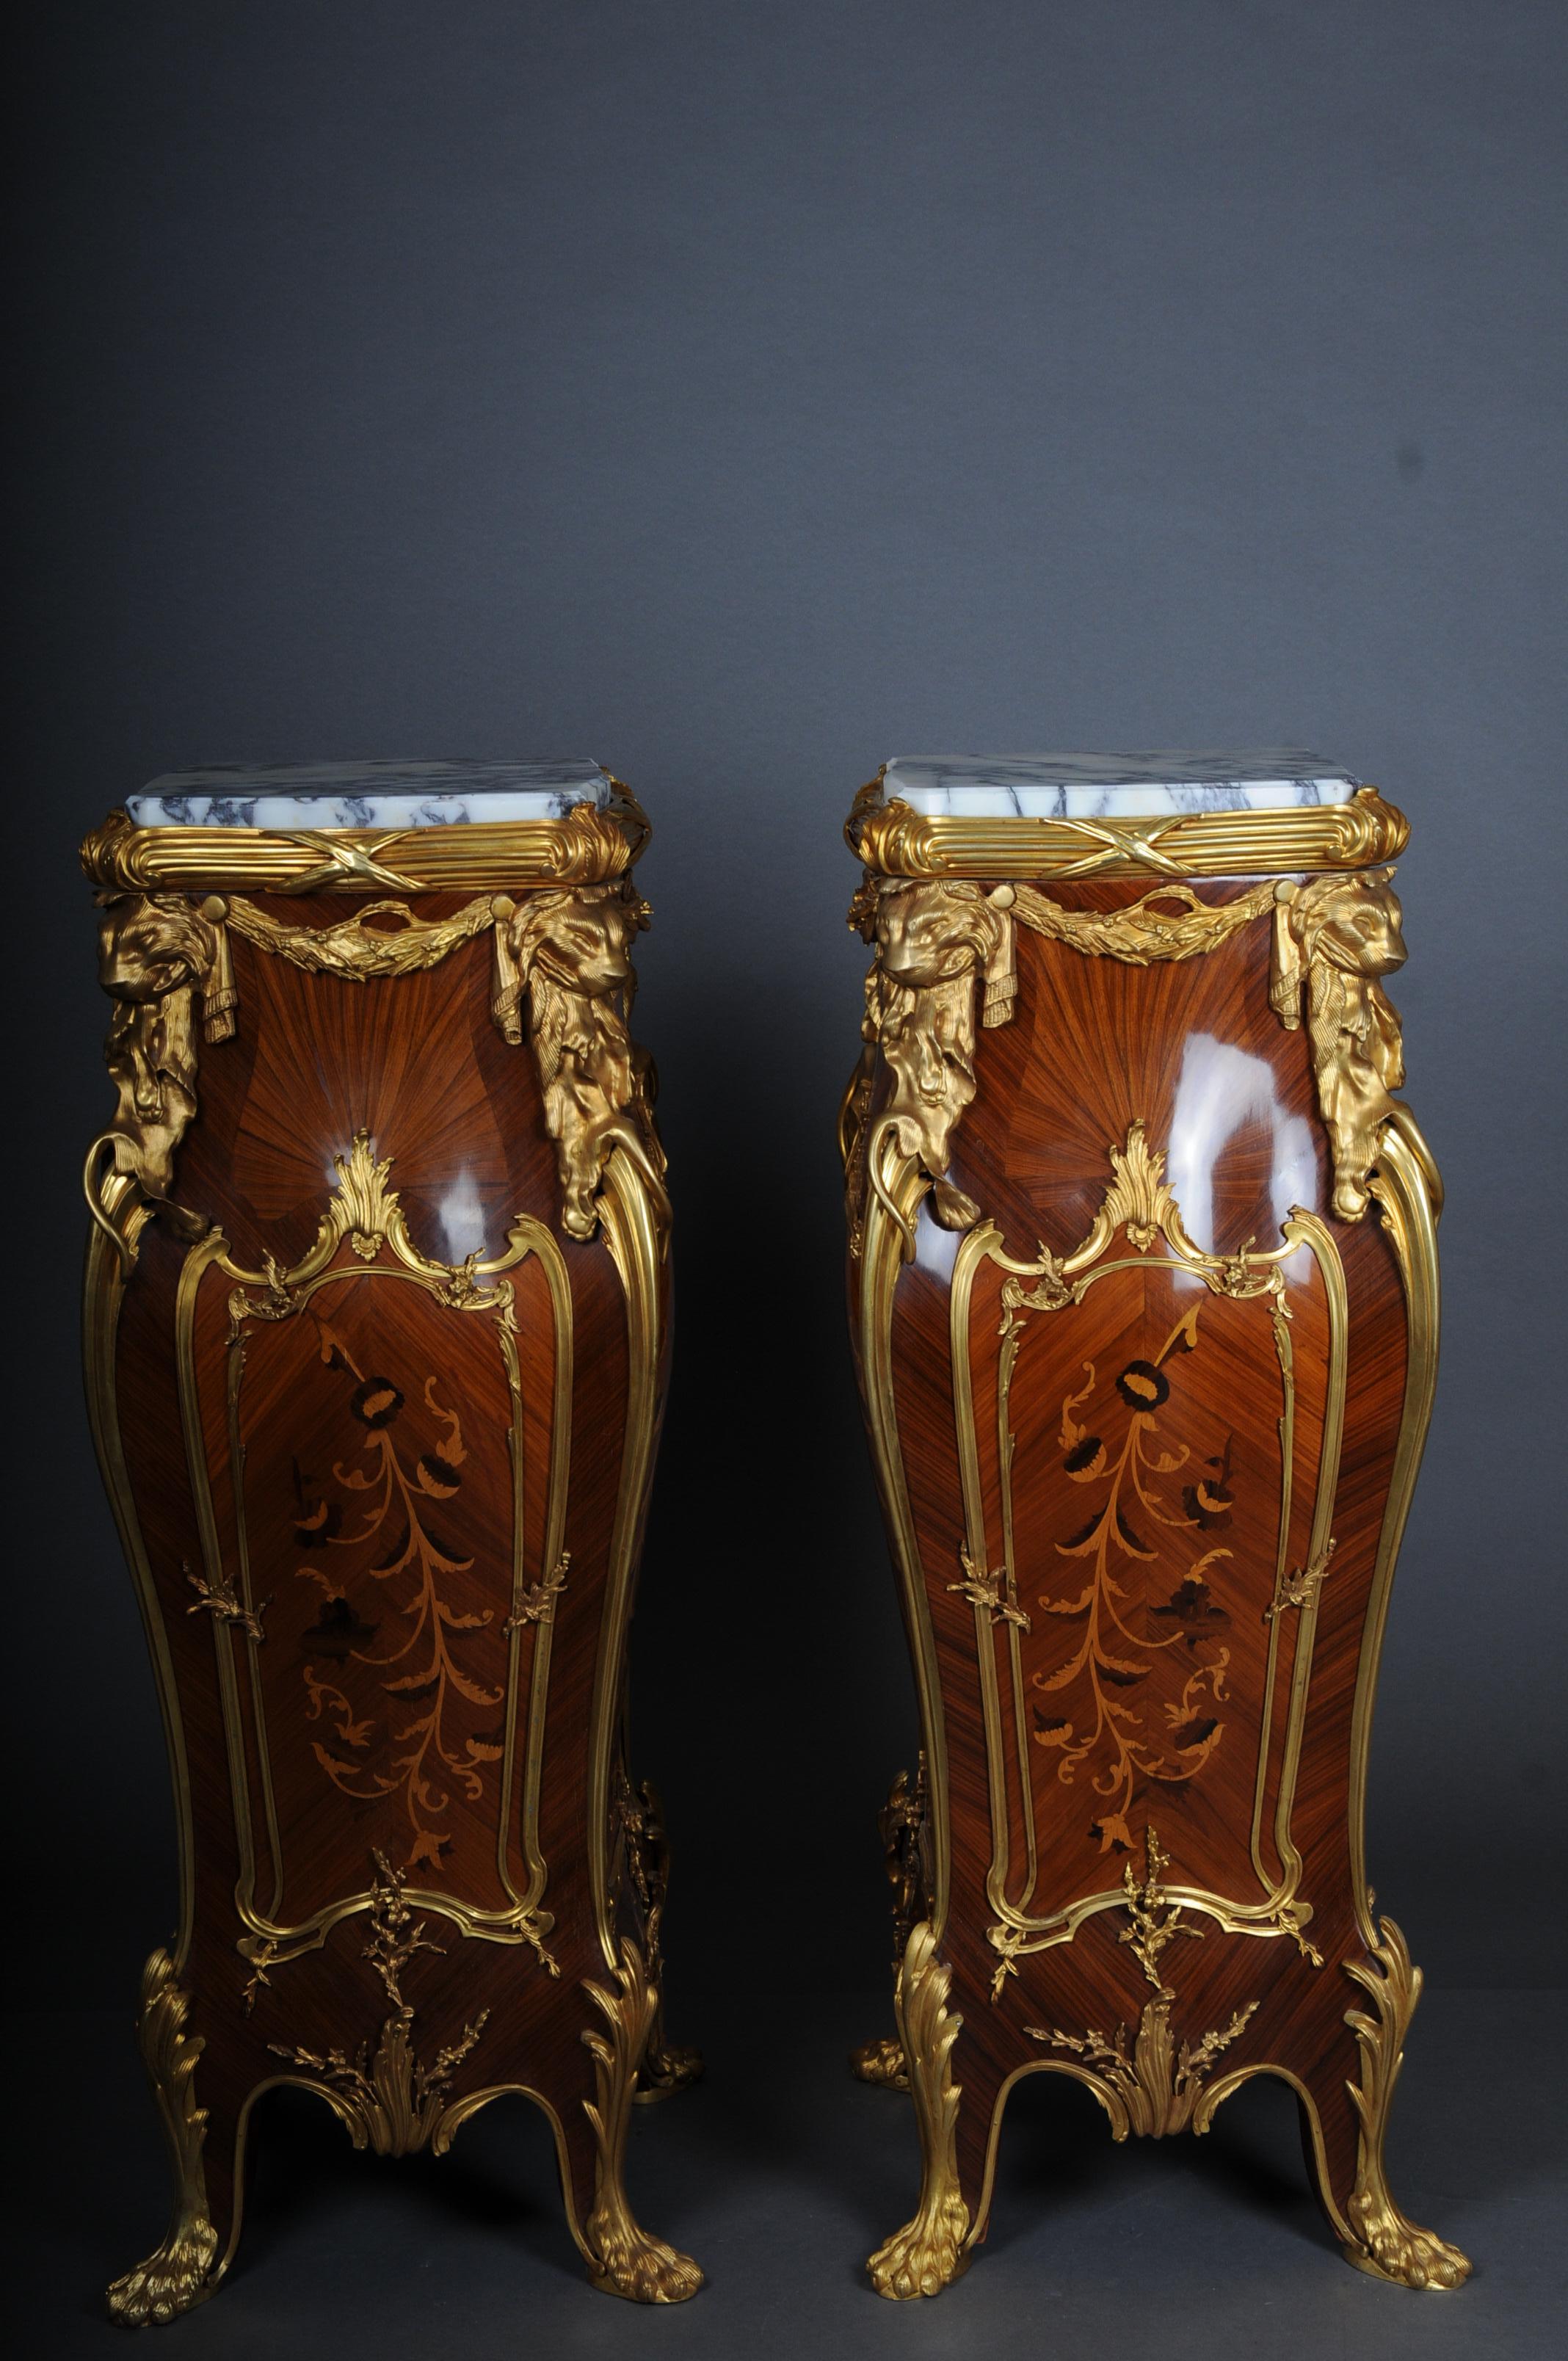 20th Century pair of ormolu pedestals/column after François Linke, bronze valid.

Solid beech wood, cambered body with rich and high quality marquetry/inlaid veneer work. High-quality gilded bronze with fine chasing. Very high-quality processed